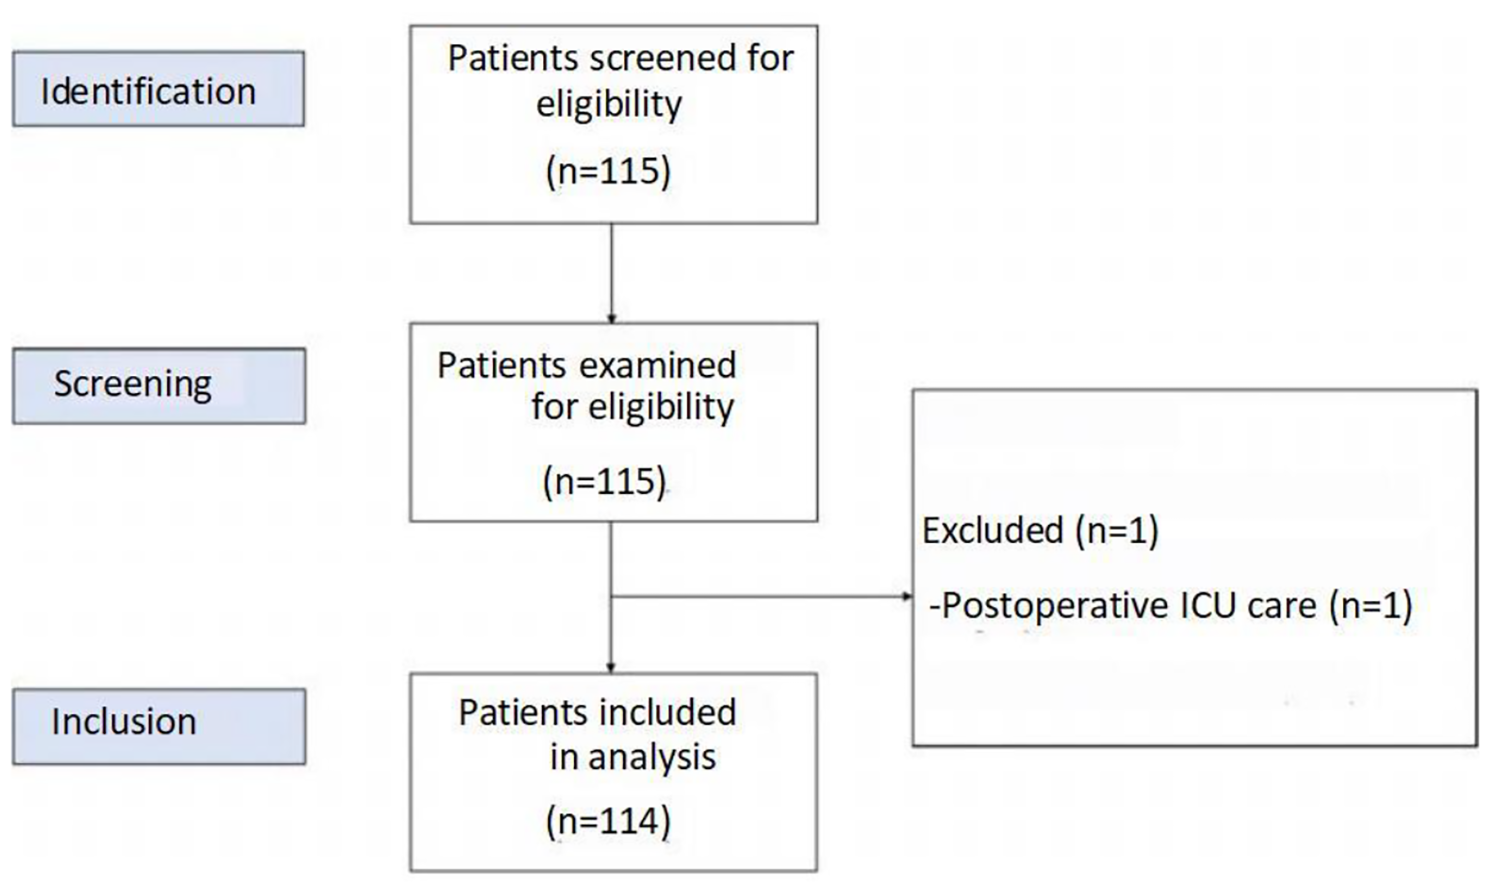 Analysis of influencing factors and construction of prediction model for postoperative nausea and vomiting in patients undergoing laparoscopic sleeve gastrectomy: a single-center retrospective cohort study